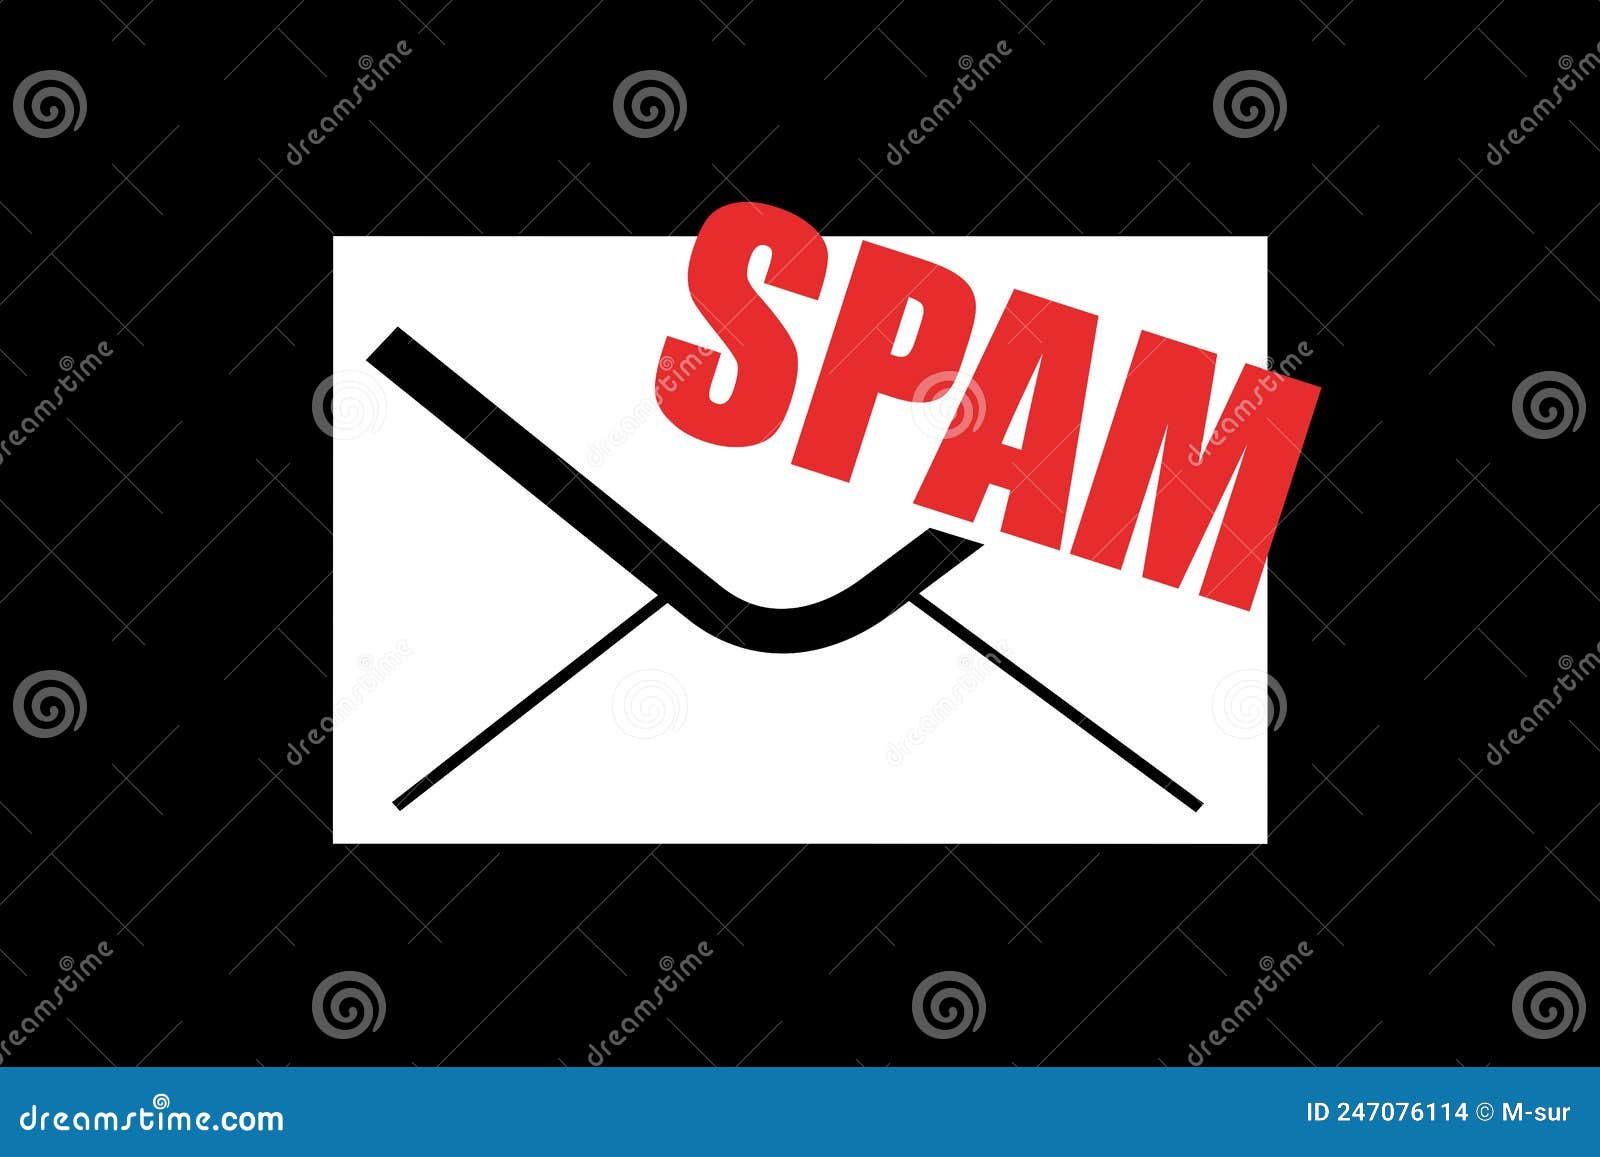 spam filter - spam and unsolicited electronic message, mail, email and e-mail is detected and labeled as unrequested, unwanted